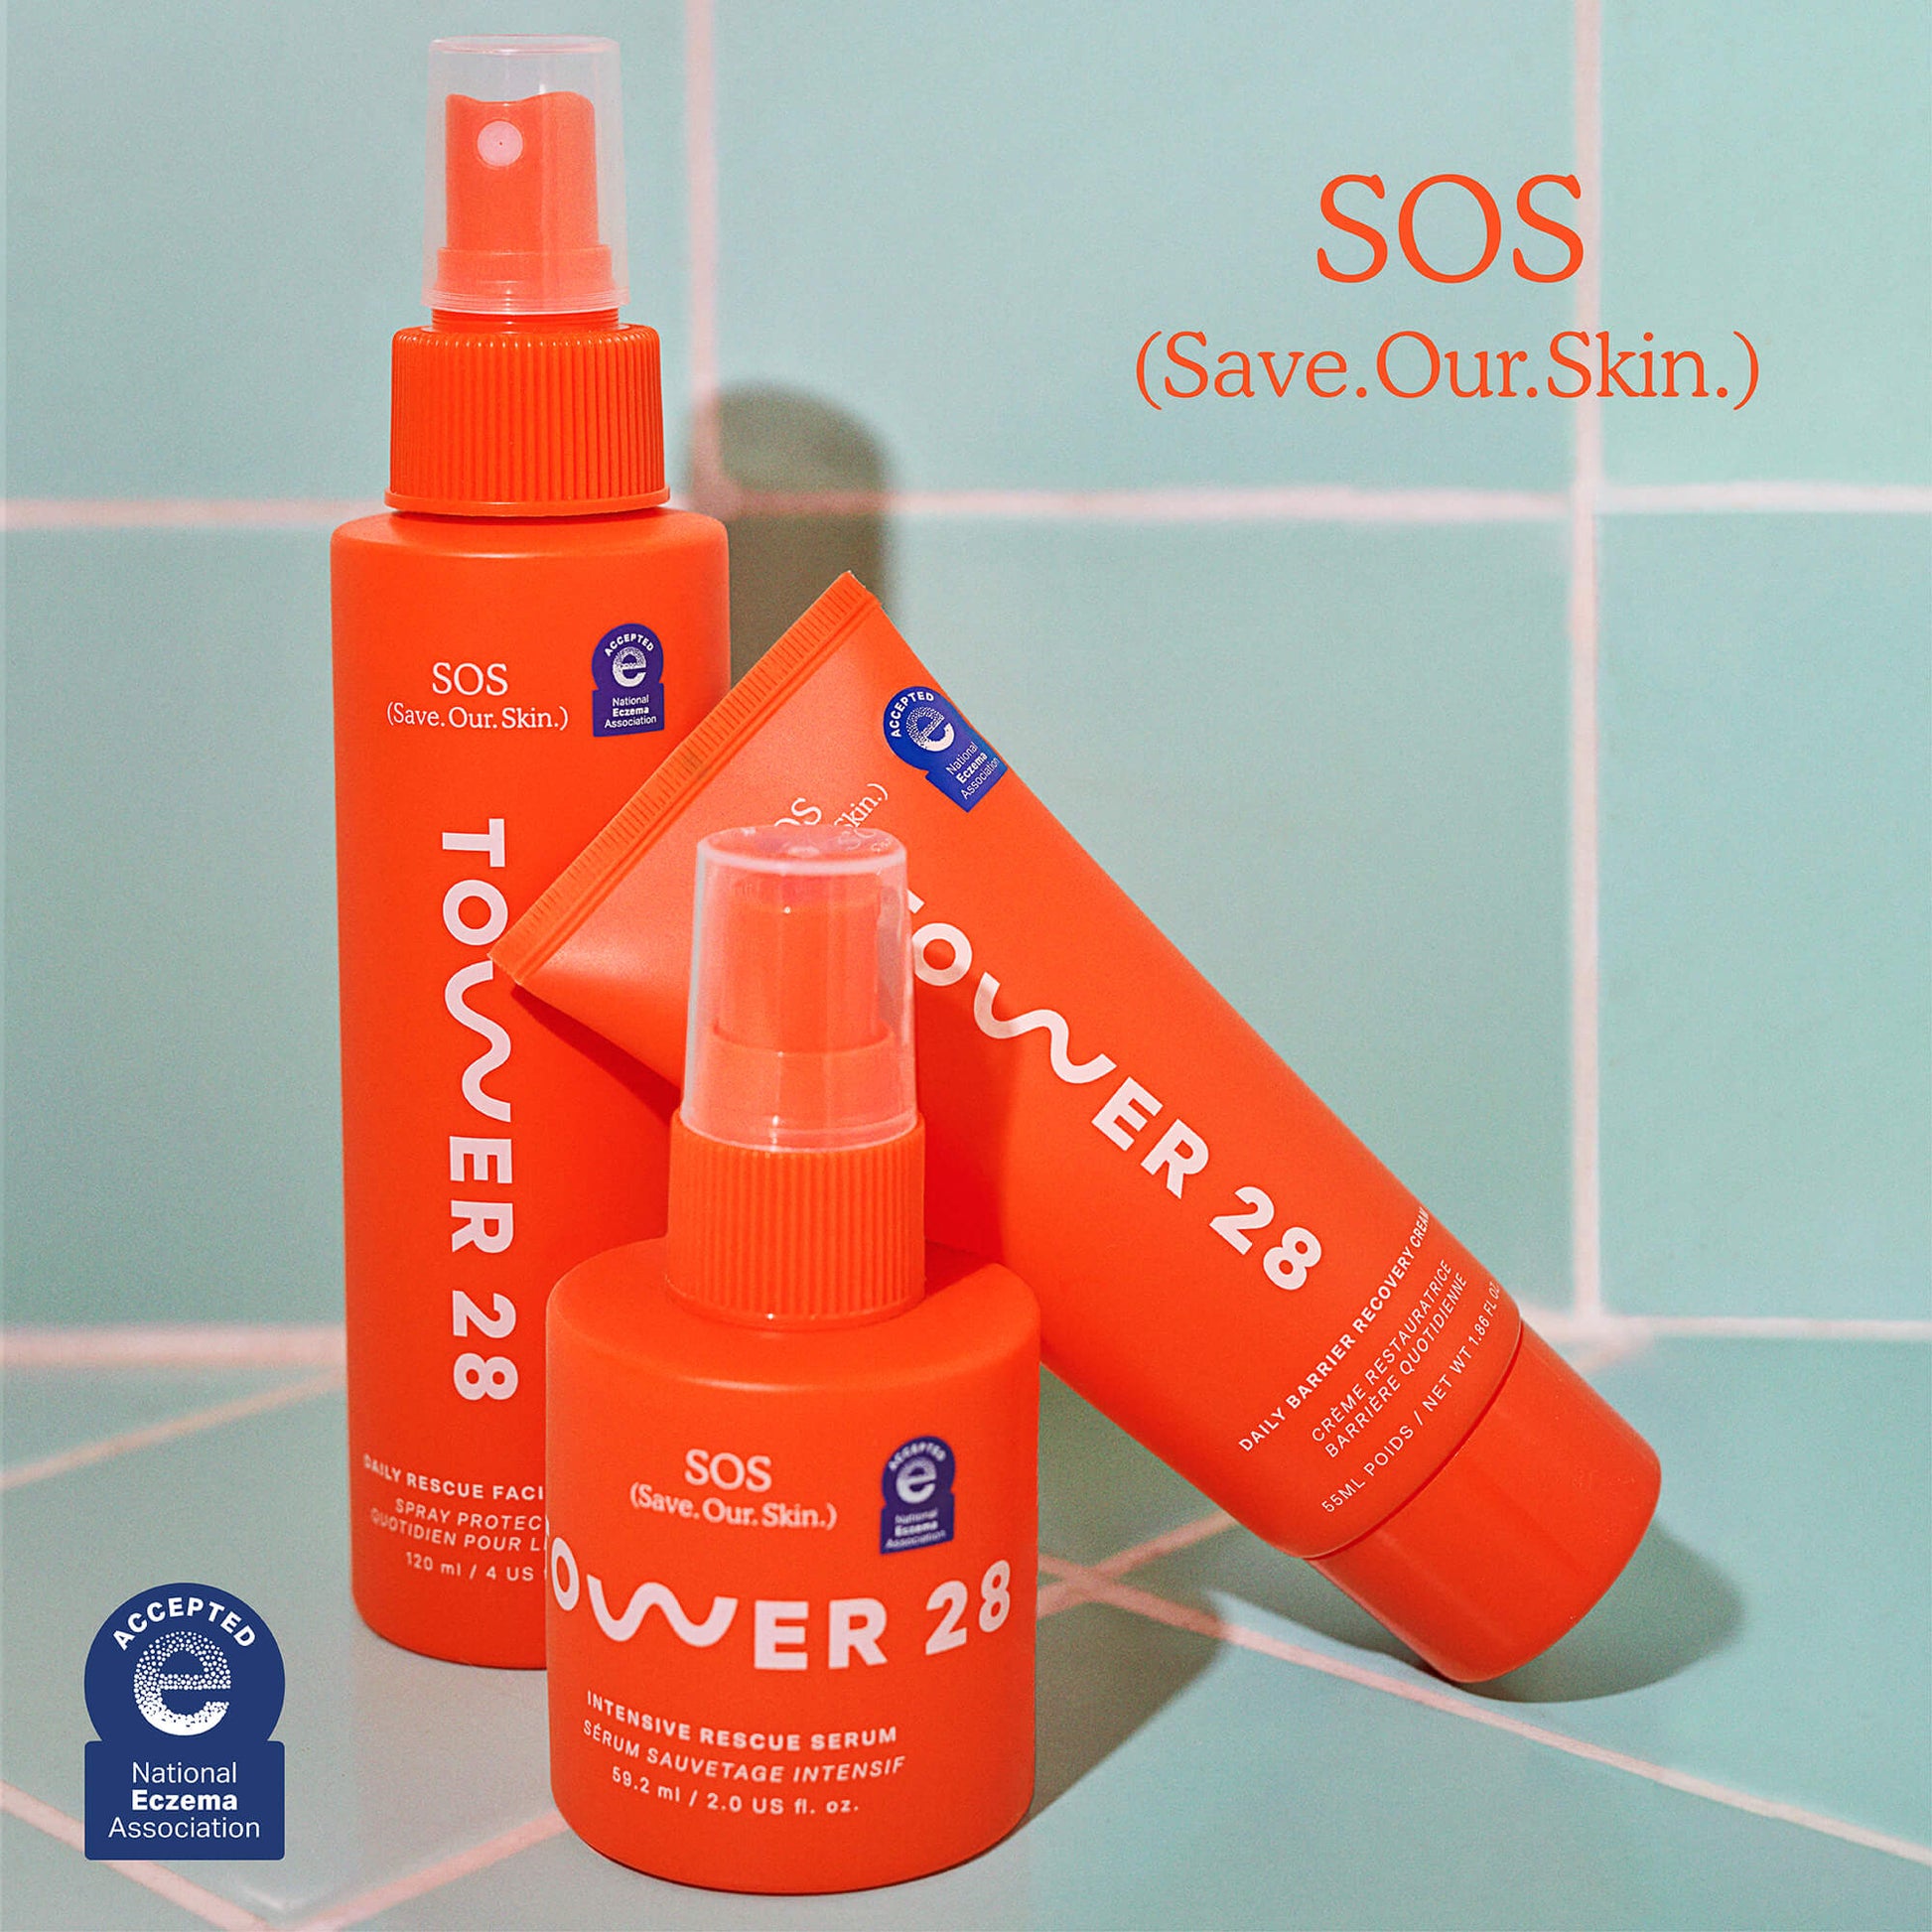 [Shared: Tower 28 Beauty Complete Skincare Routine. SOS Daily Rescue Facial Spray Full-Size. SOS Intensive Rescue Serum. SOS Daily Barrier Recovery Cream. Shown in bathroom over blue tile. Overlayed with National Eczema Association Seal of Acceptance.